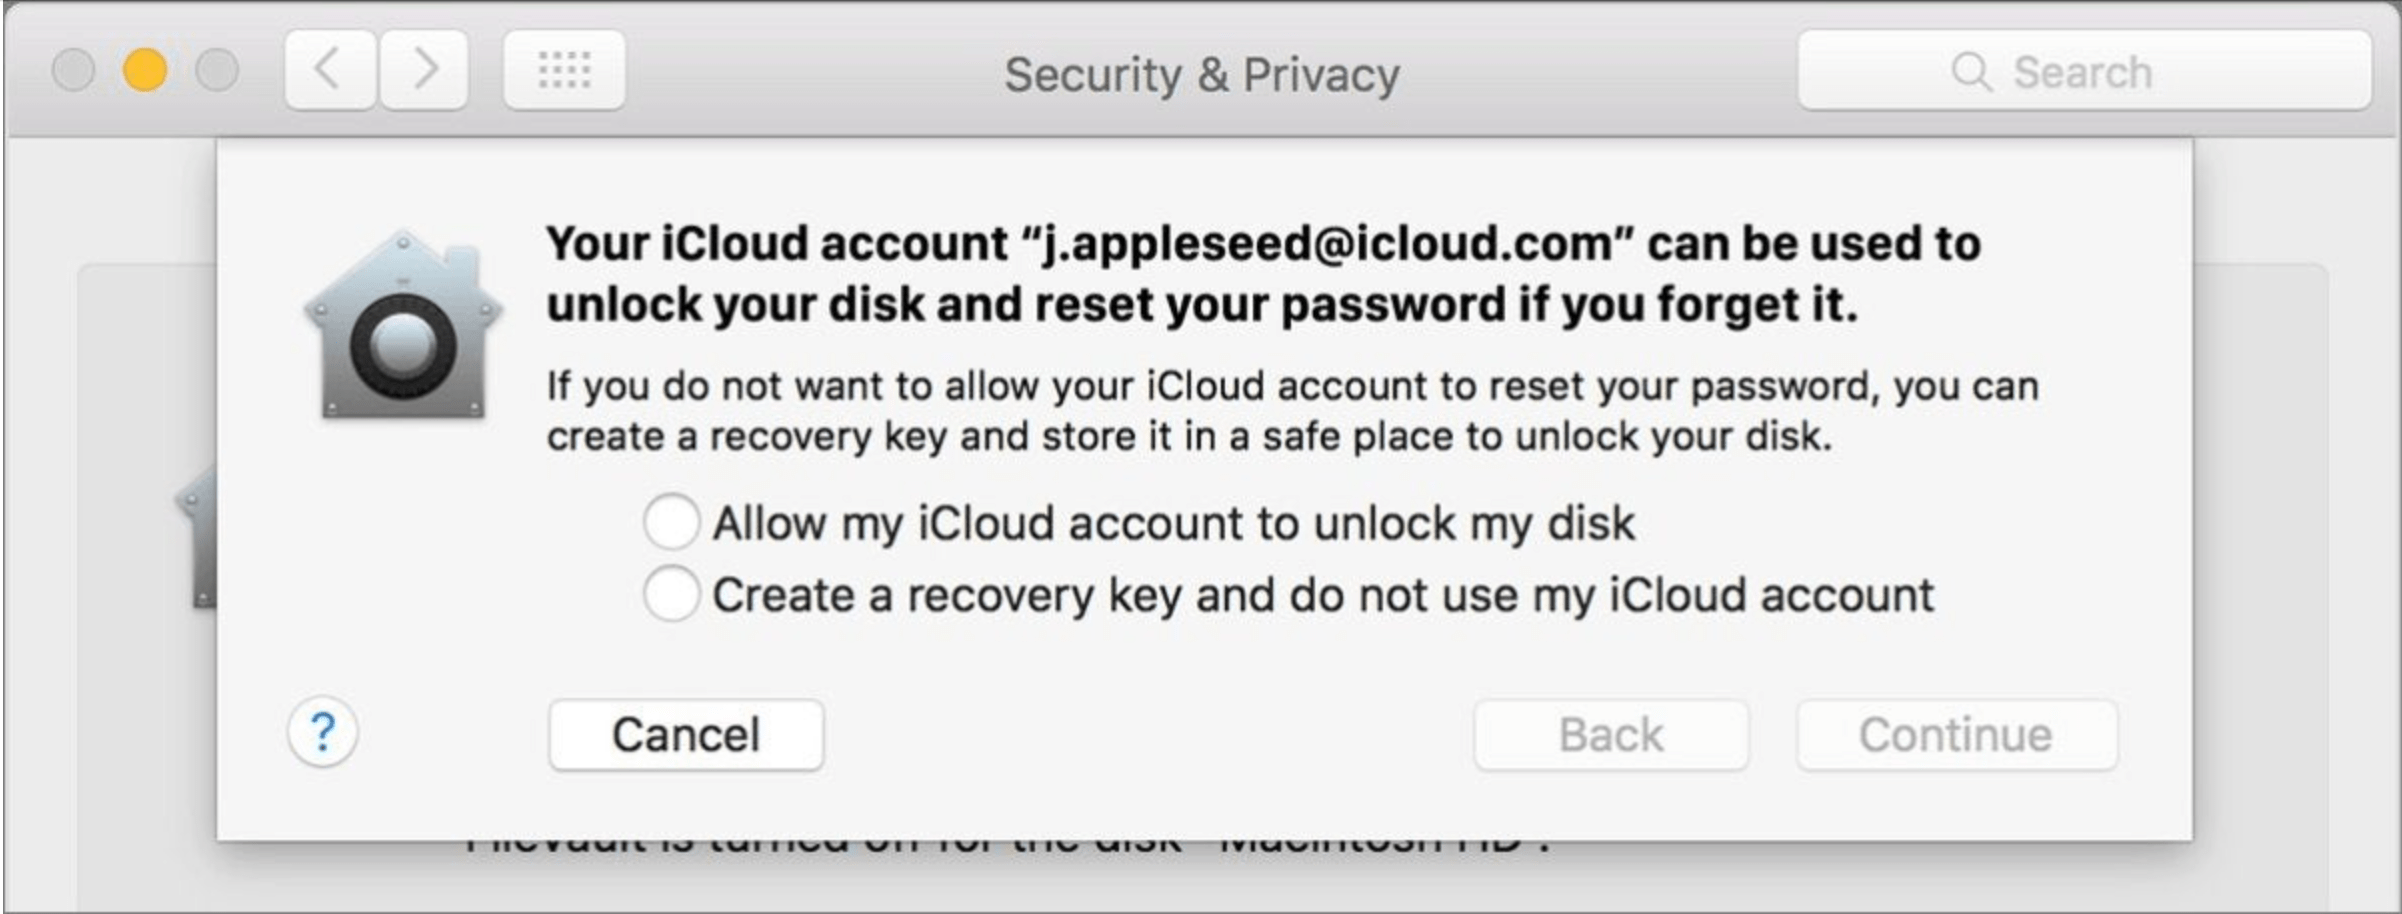 choose between iCloud and recovery key for FileVault